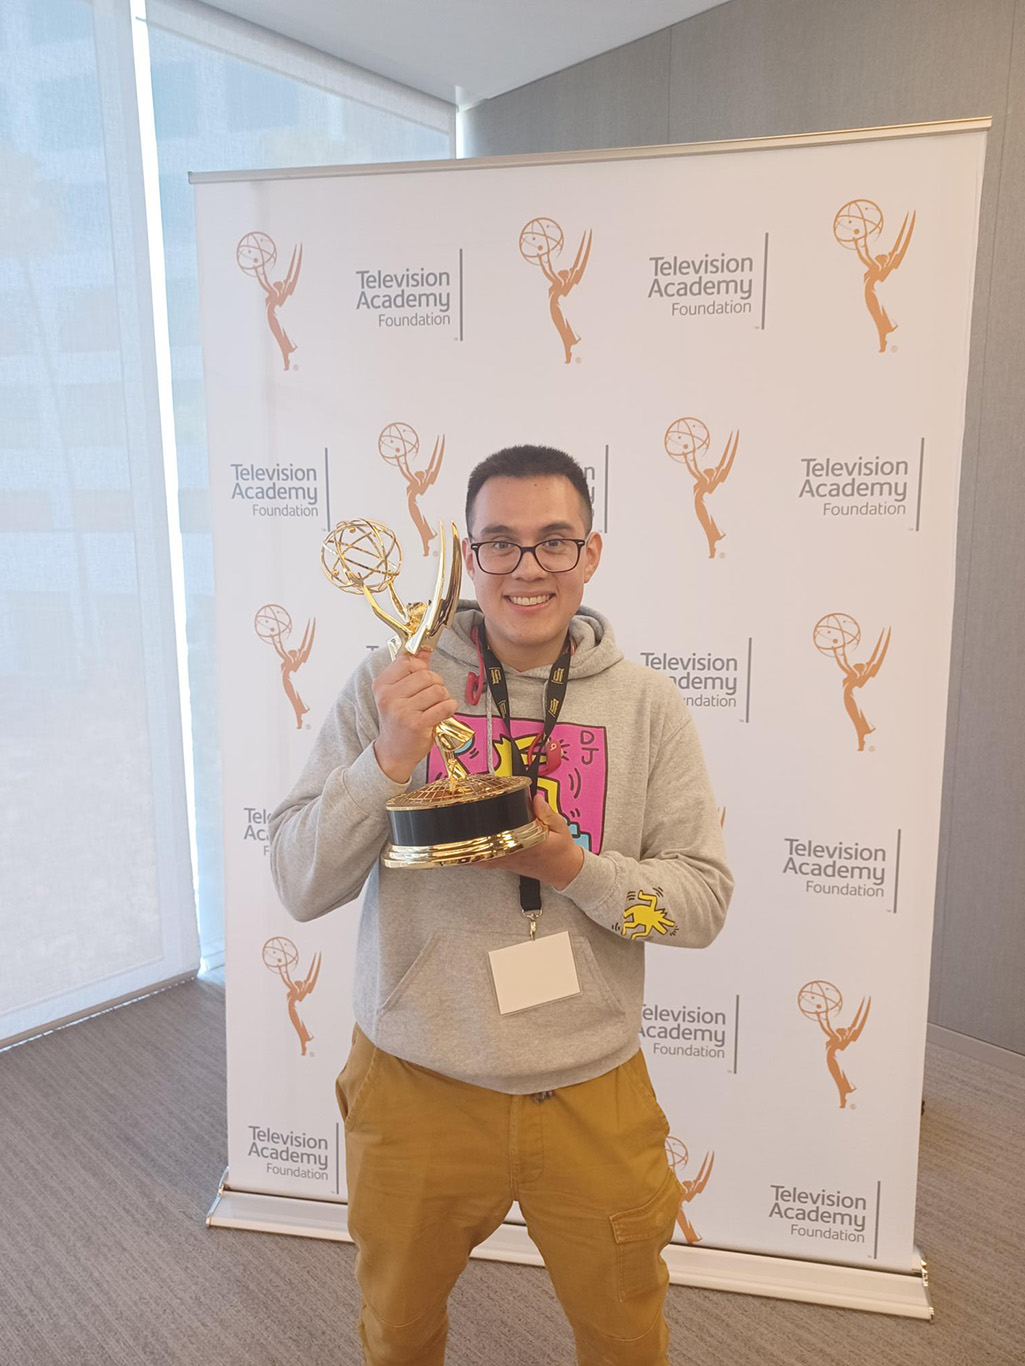 Kevin Morales-Hernandez with Television Academy Award